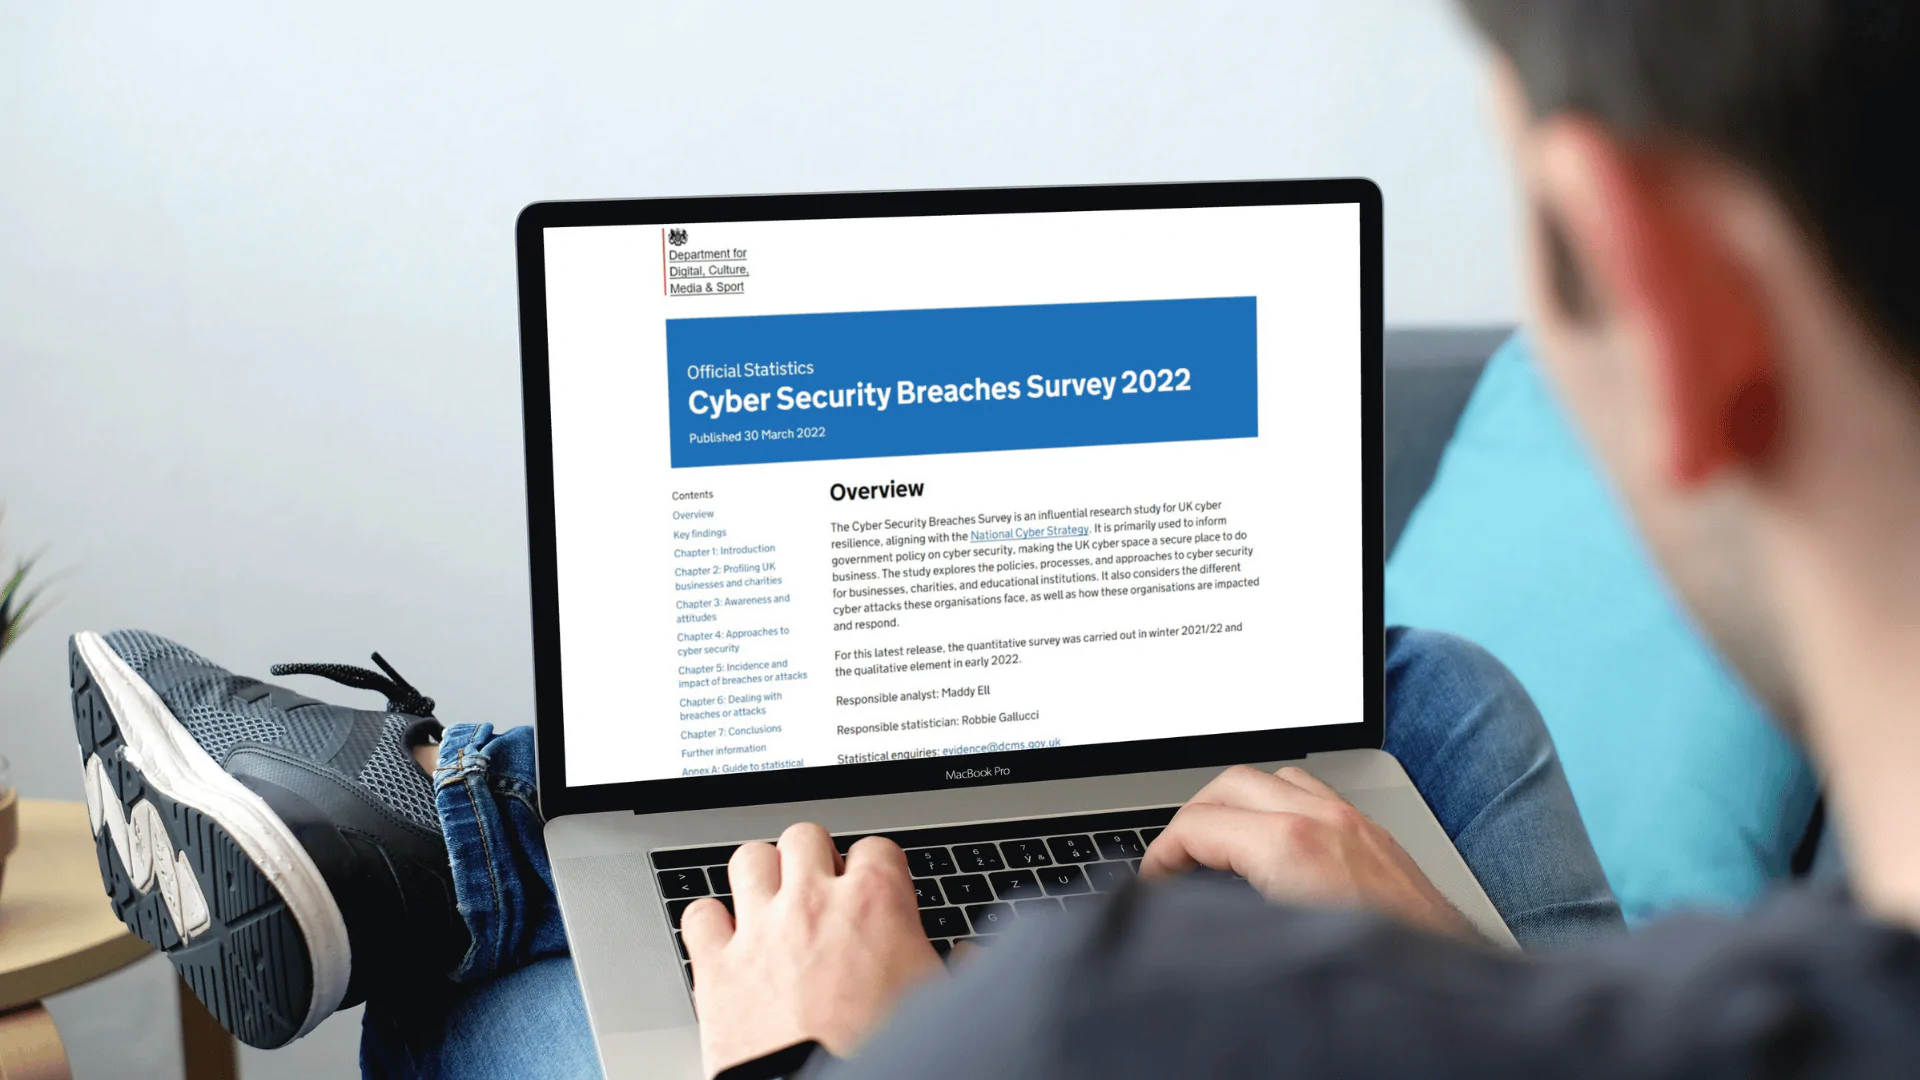 DCMS Survey Highlights the Challenge Ahead for Cybersecurity